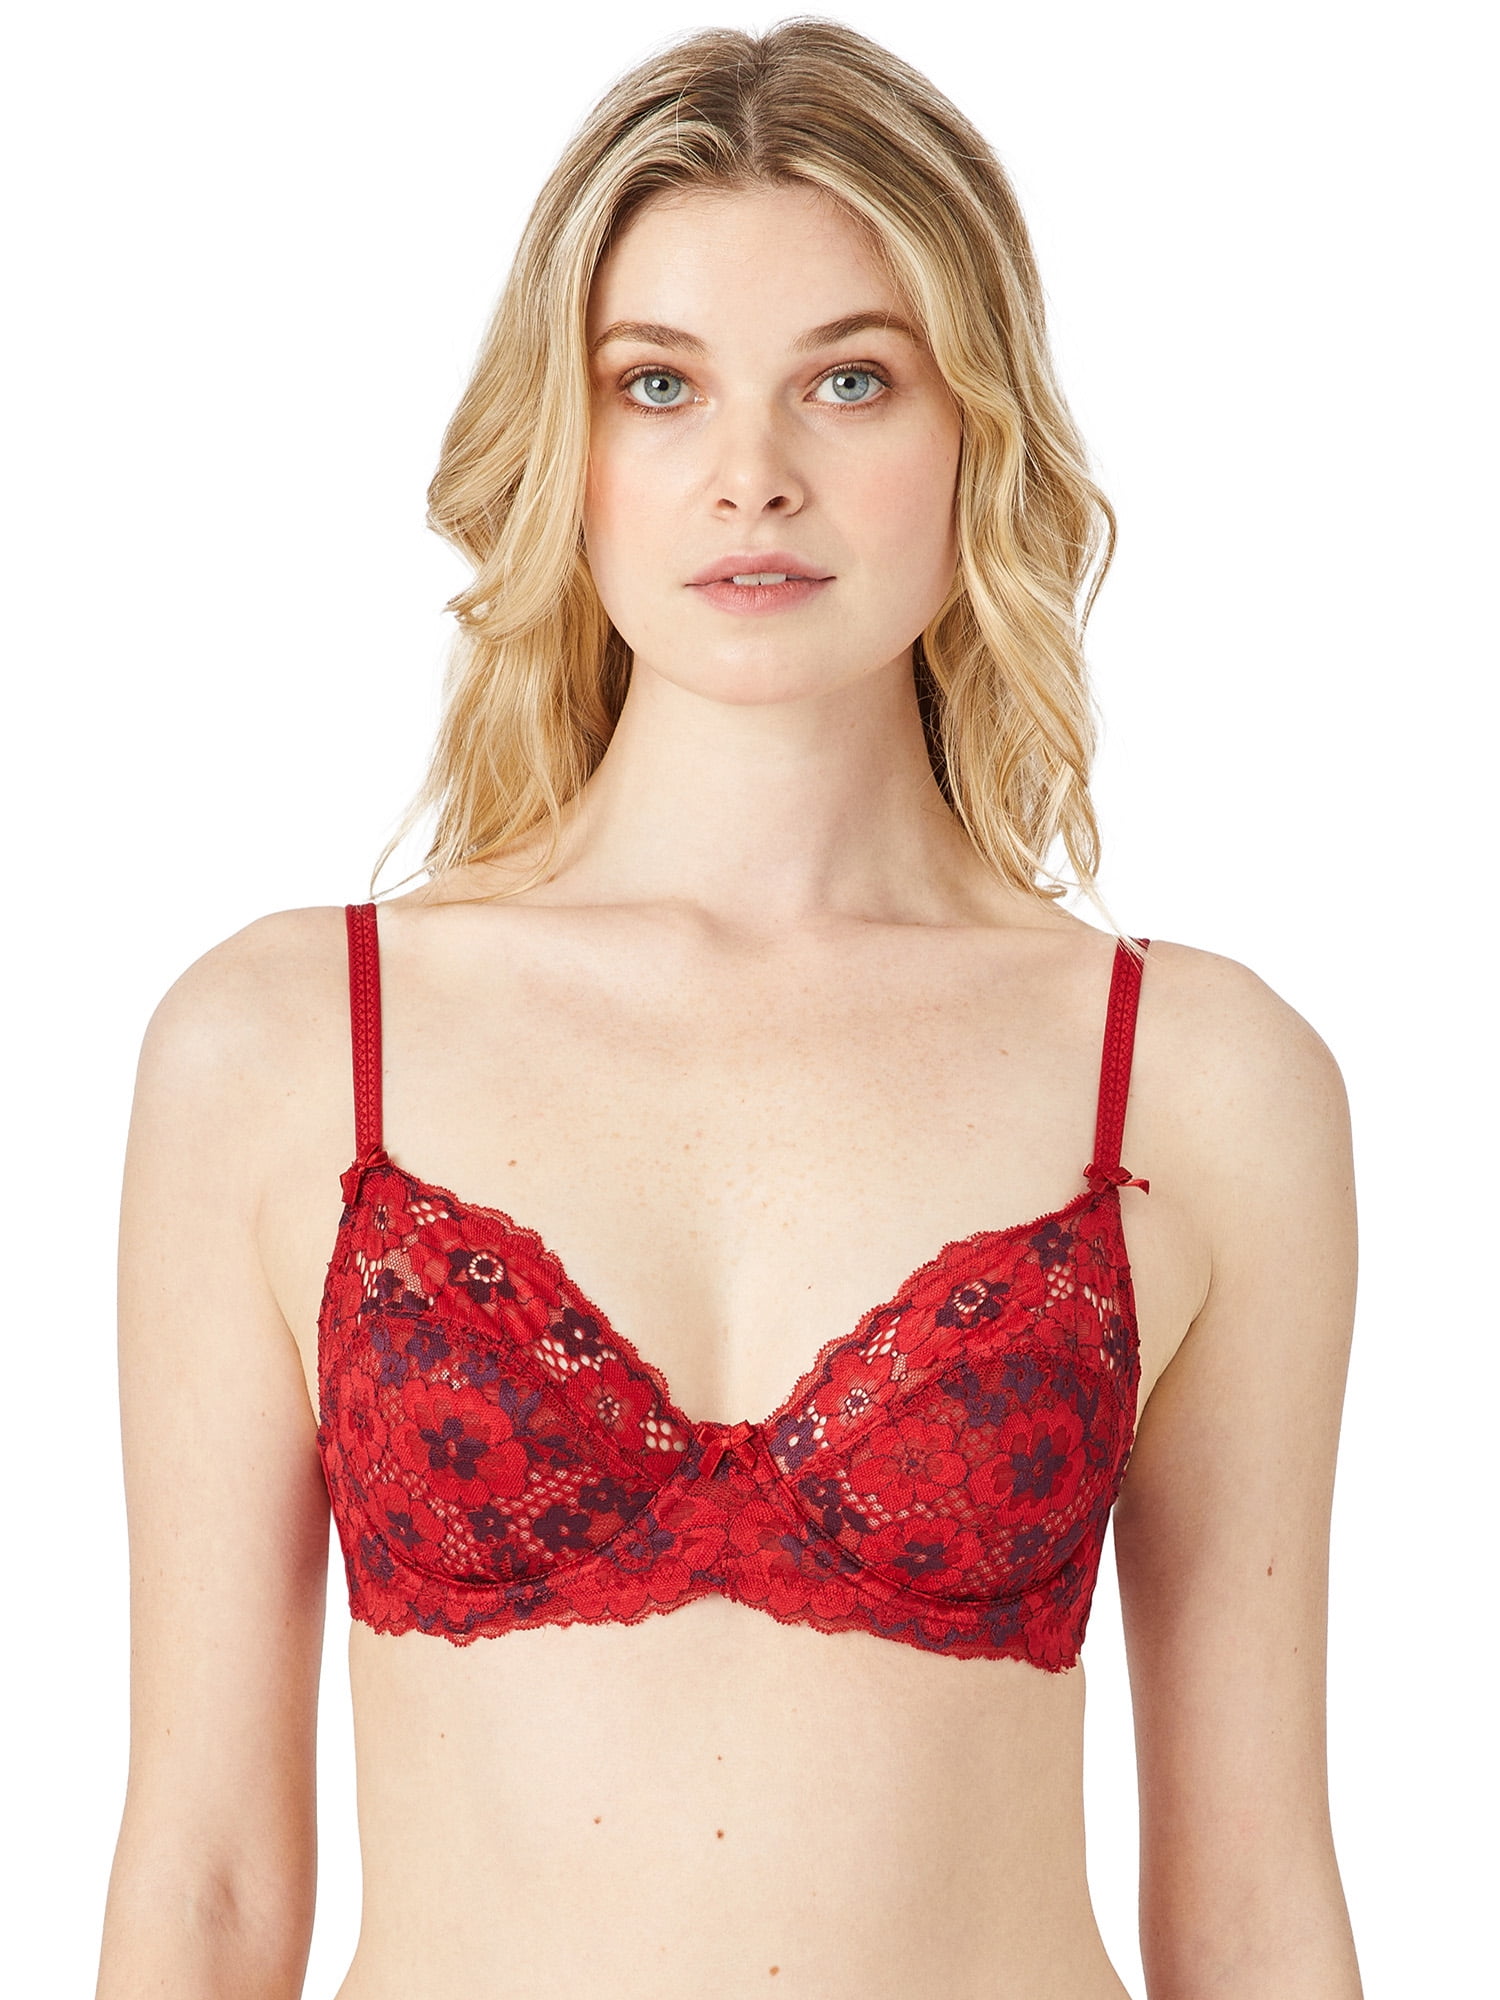 Adored by Adore Me Women's Layla Plunge Push Up Underwire Lace Bra